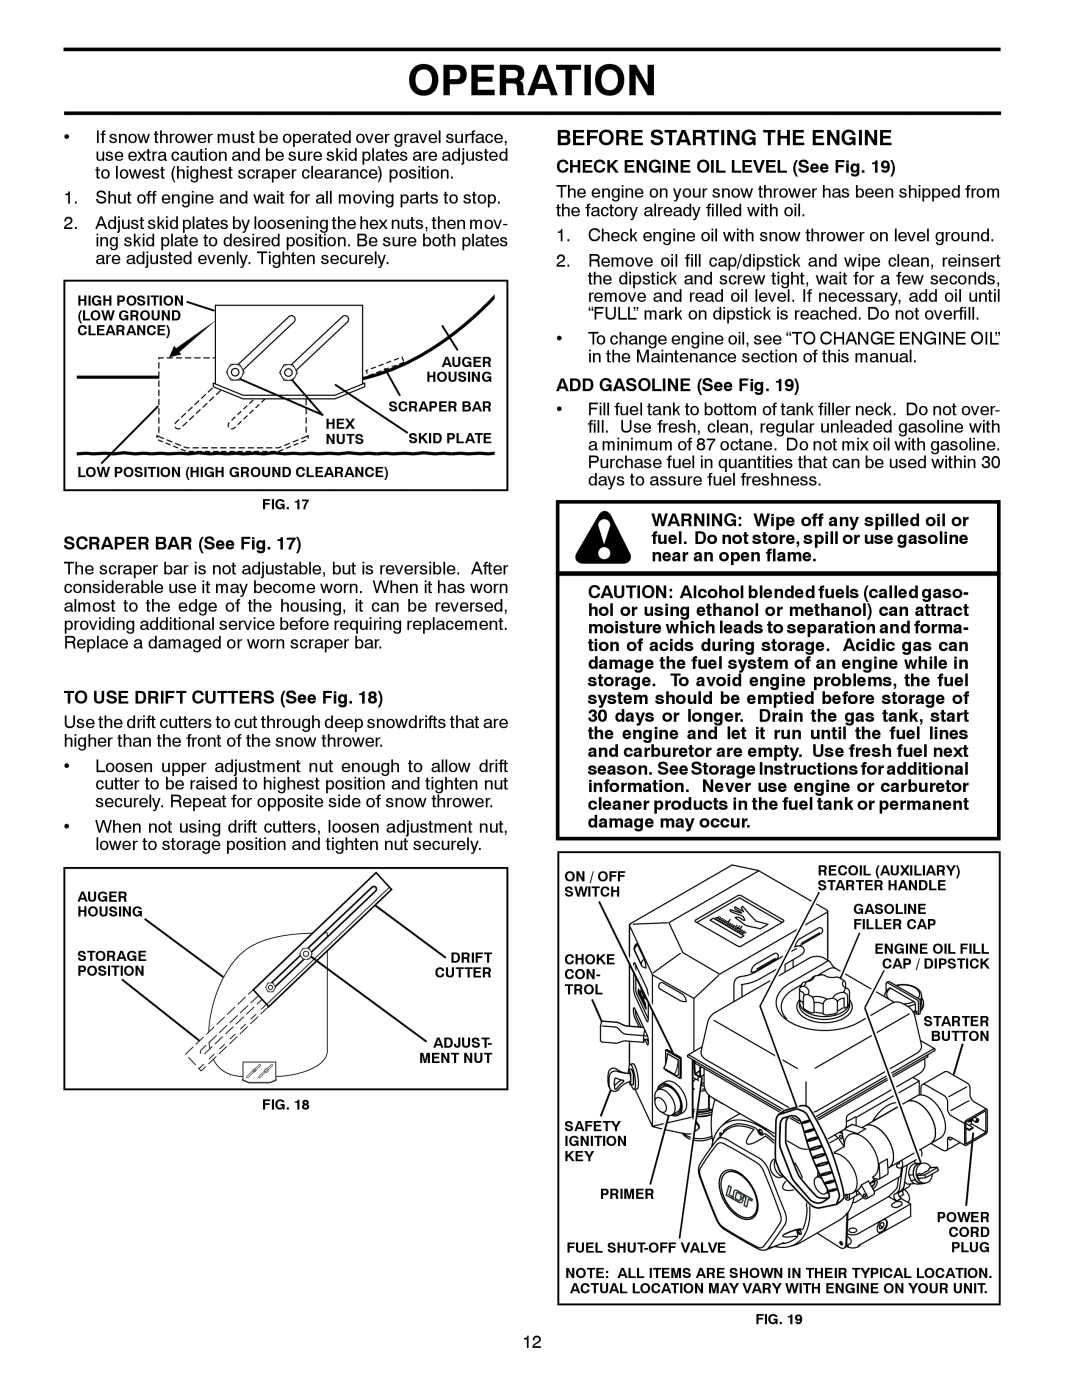 Poulan 435555, 96198003001 Before Starting The Engine, Operation, SCRAPER BAR See Fig, TO USE DRIFT CUTTERS See Fig 